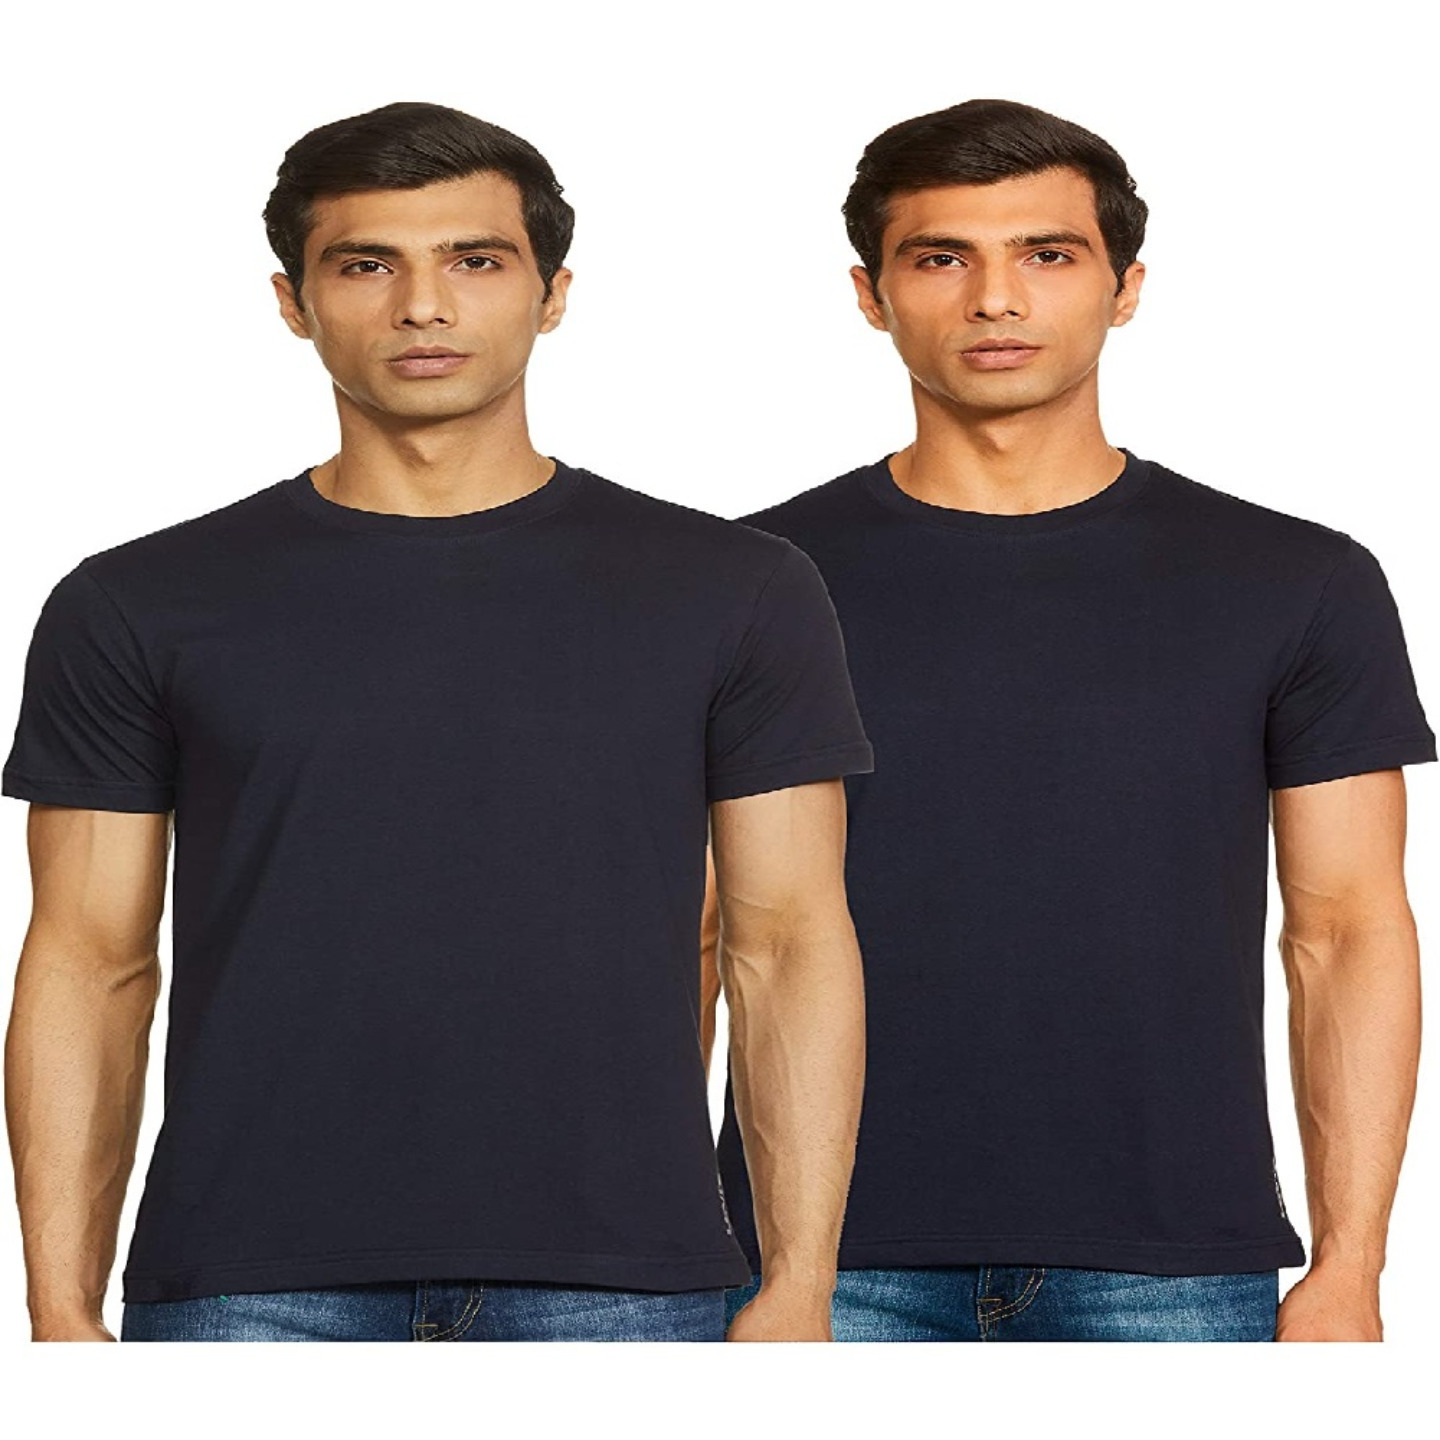 Levi’s Ultra-Soft Cotton 300 LS Classic Round Neck T-Shirts (Pack of 2)